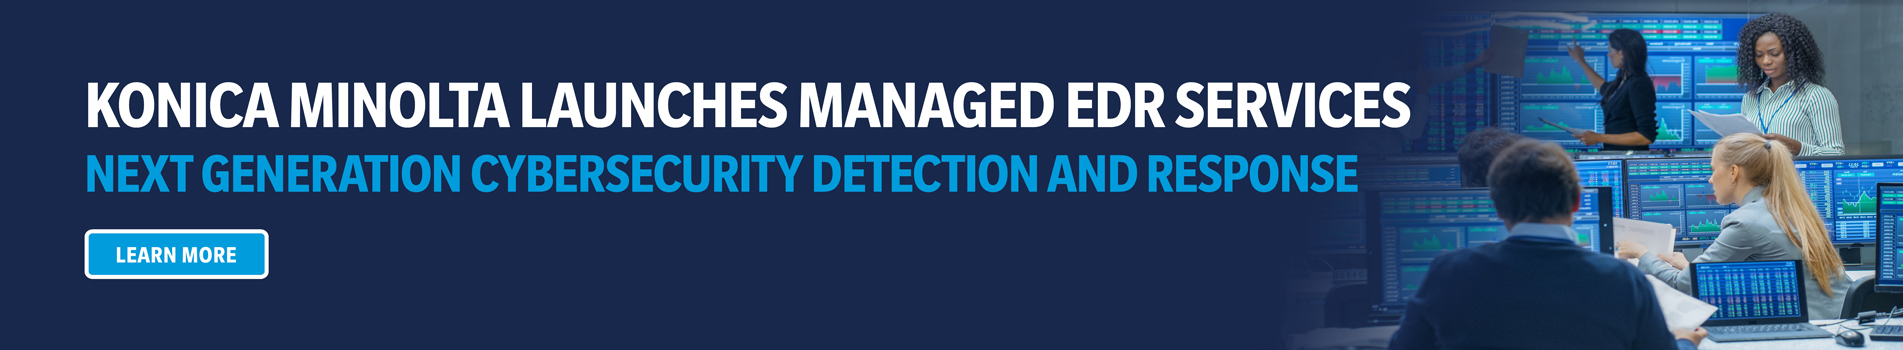 Konica Minolta Launches Managed EDR Services, next generation cybersecurity detection and response